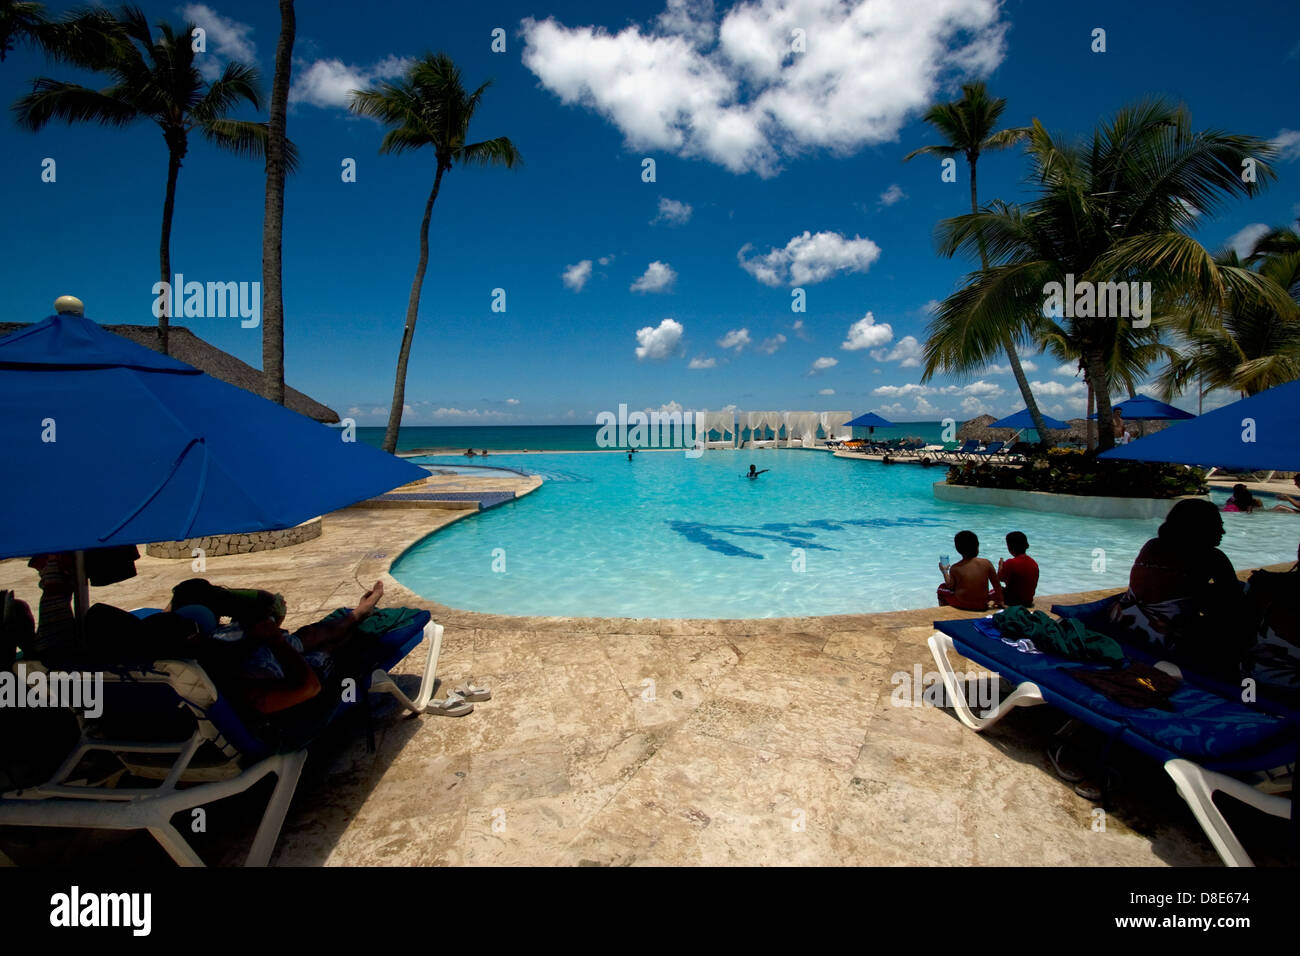 republica dominicana pool tree palm peace marble and relax near the caribbean beach Stock Photo